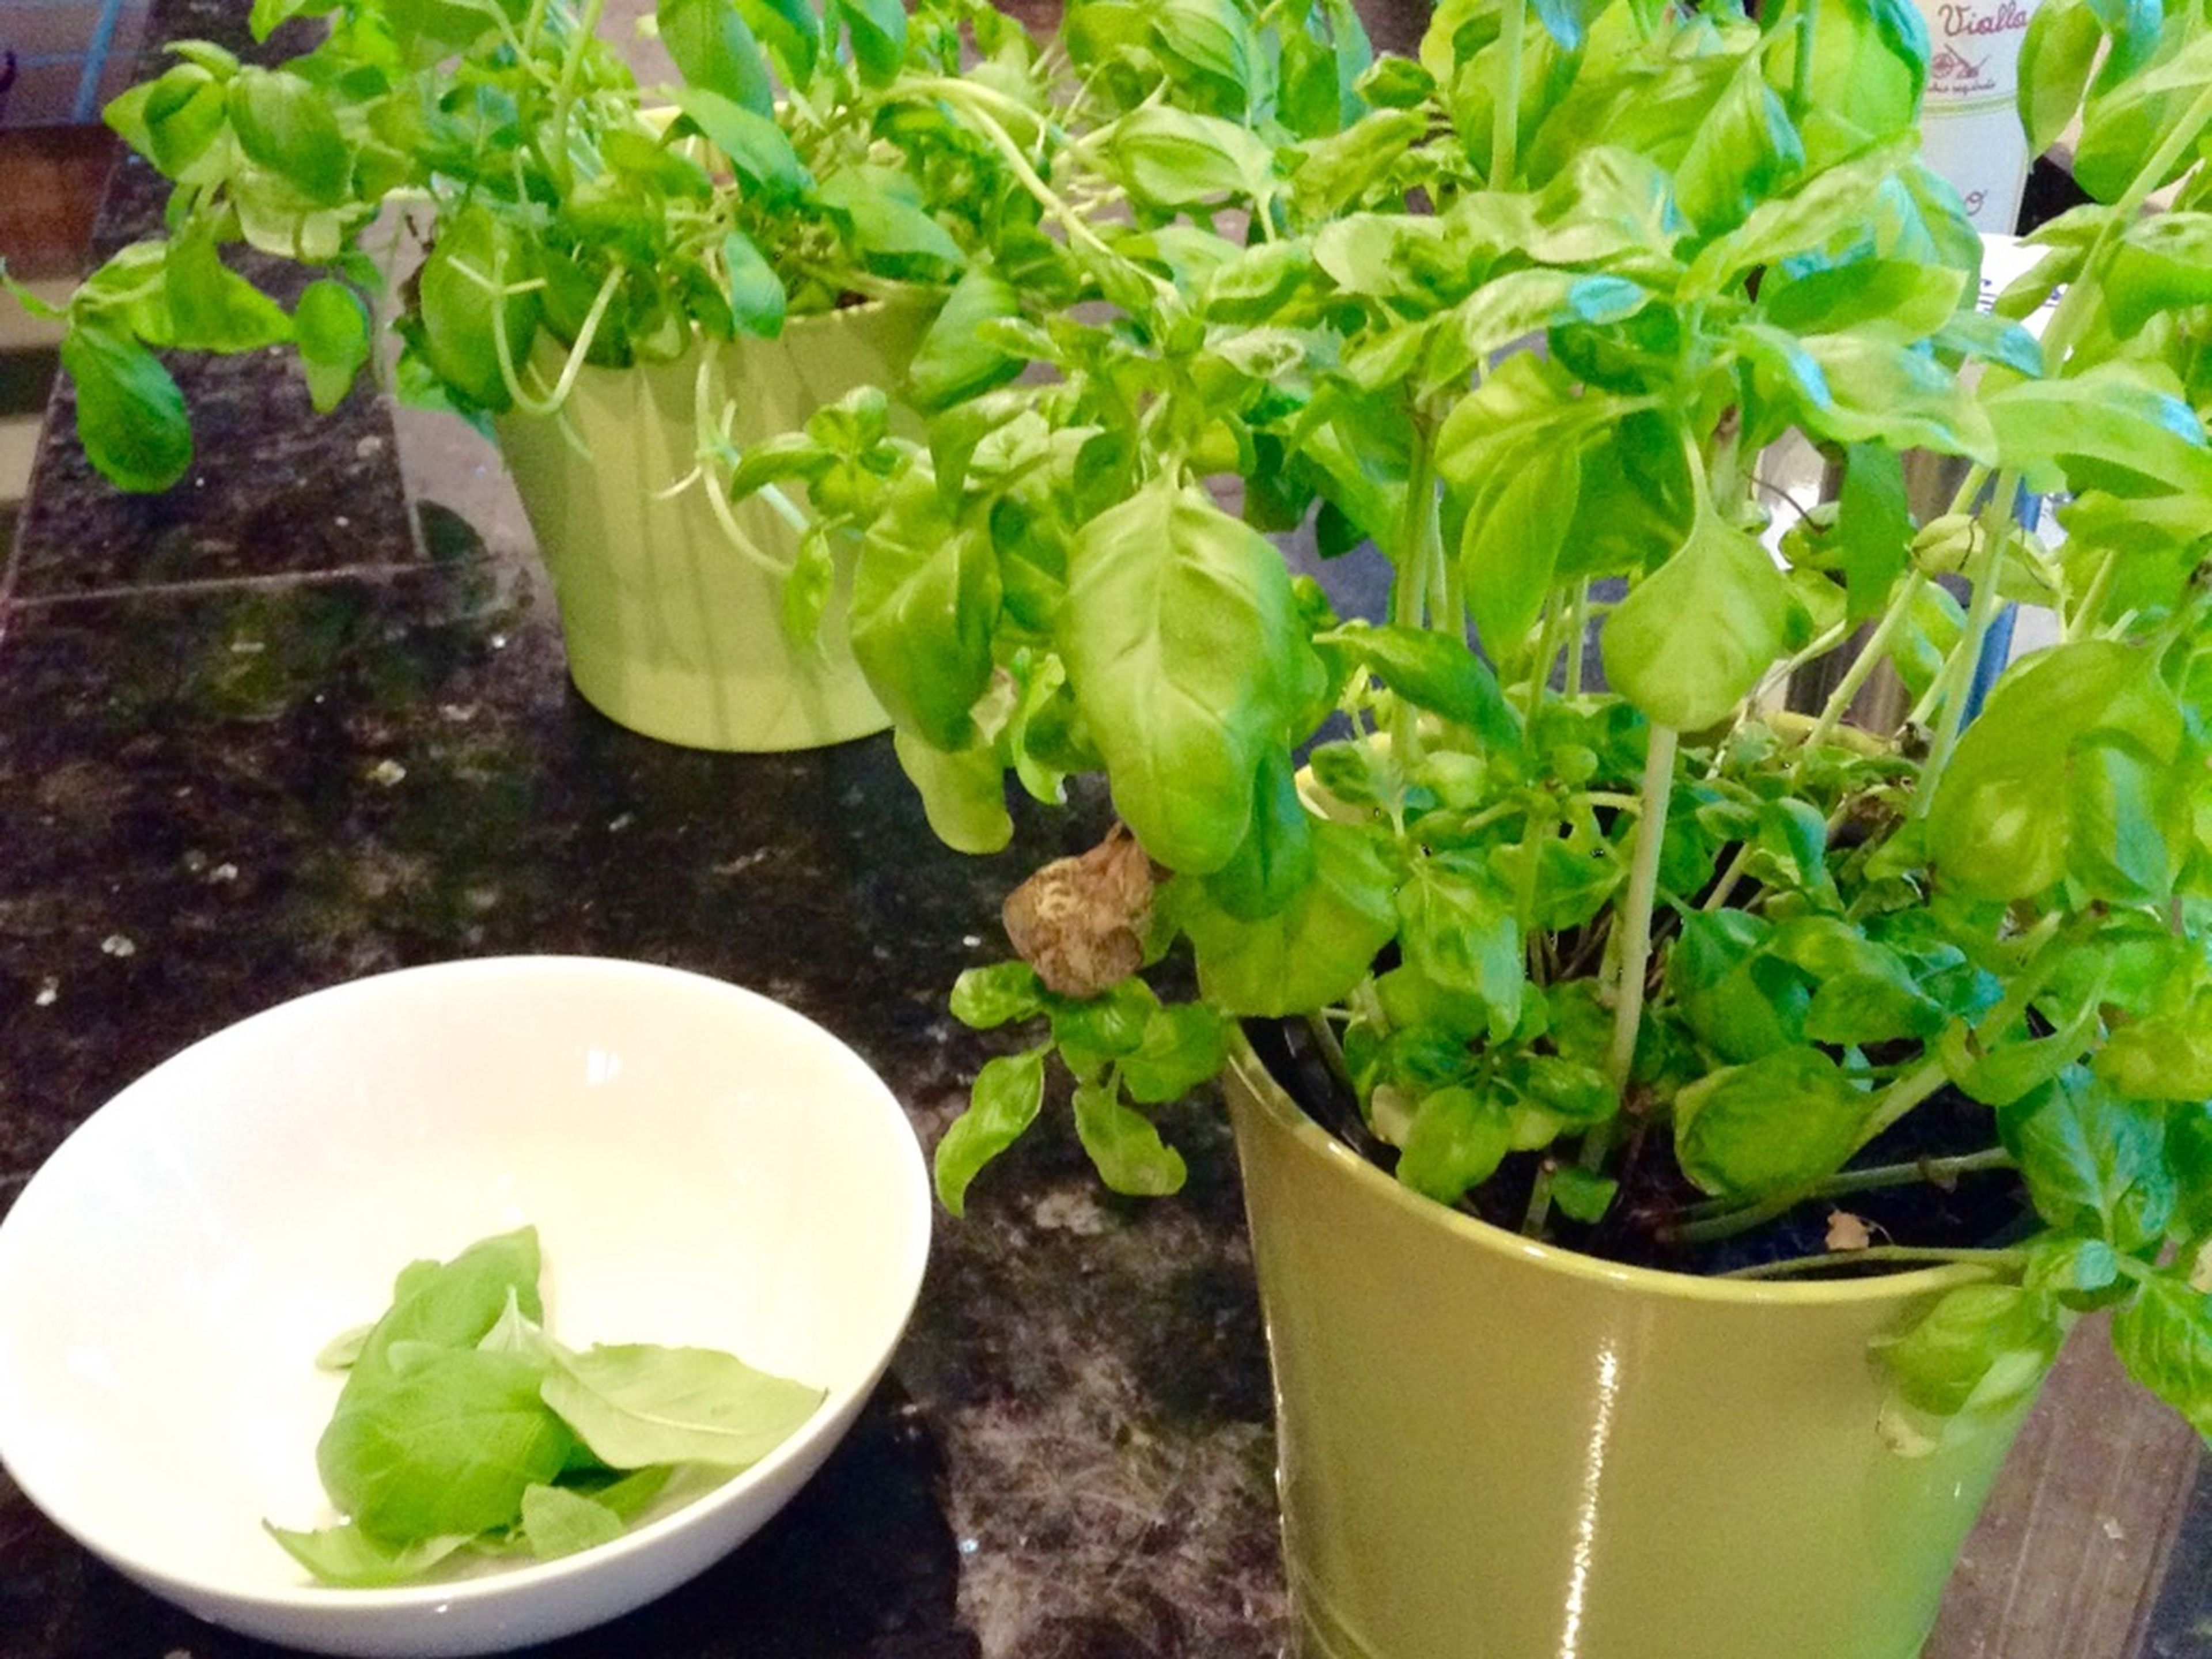 Pluck basil leaves from stems. Dice mozzarella and add to a large bowl. Wash arugula and pat dry with a paper towel or use a salad spinner.